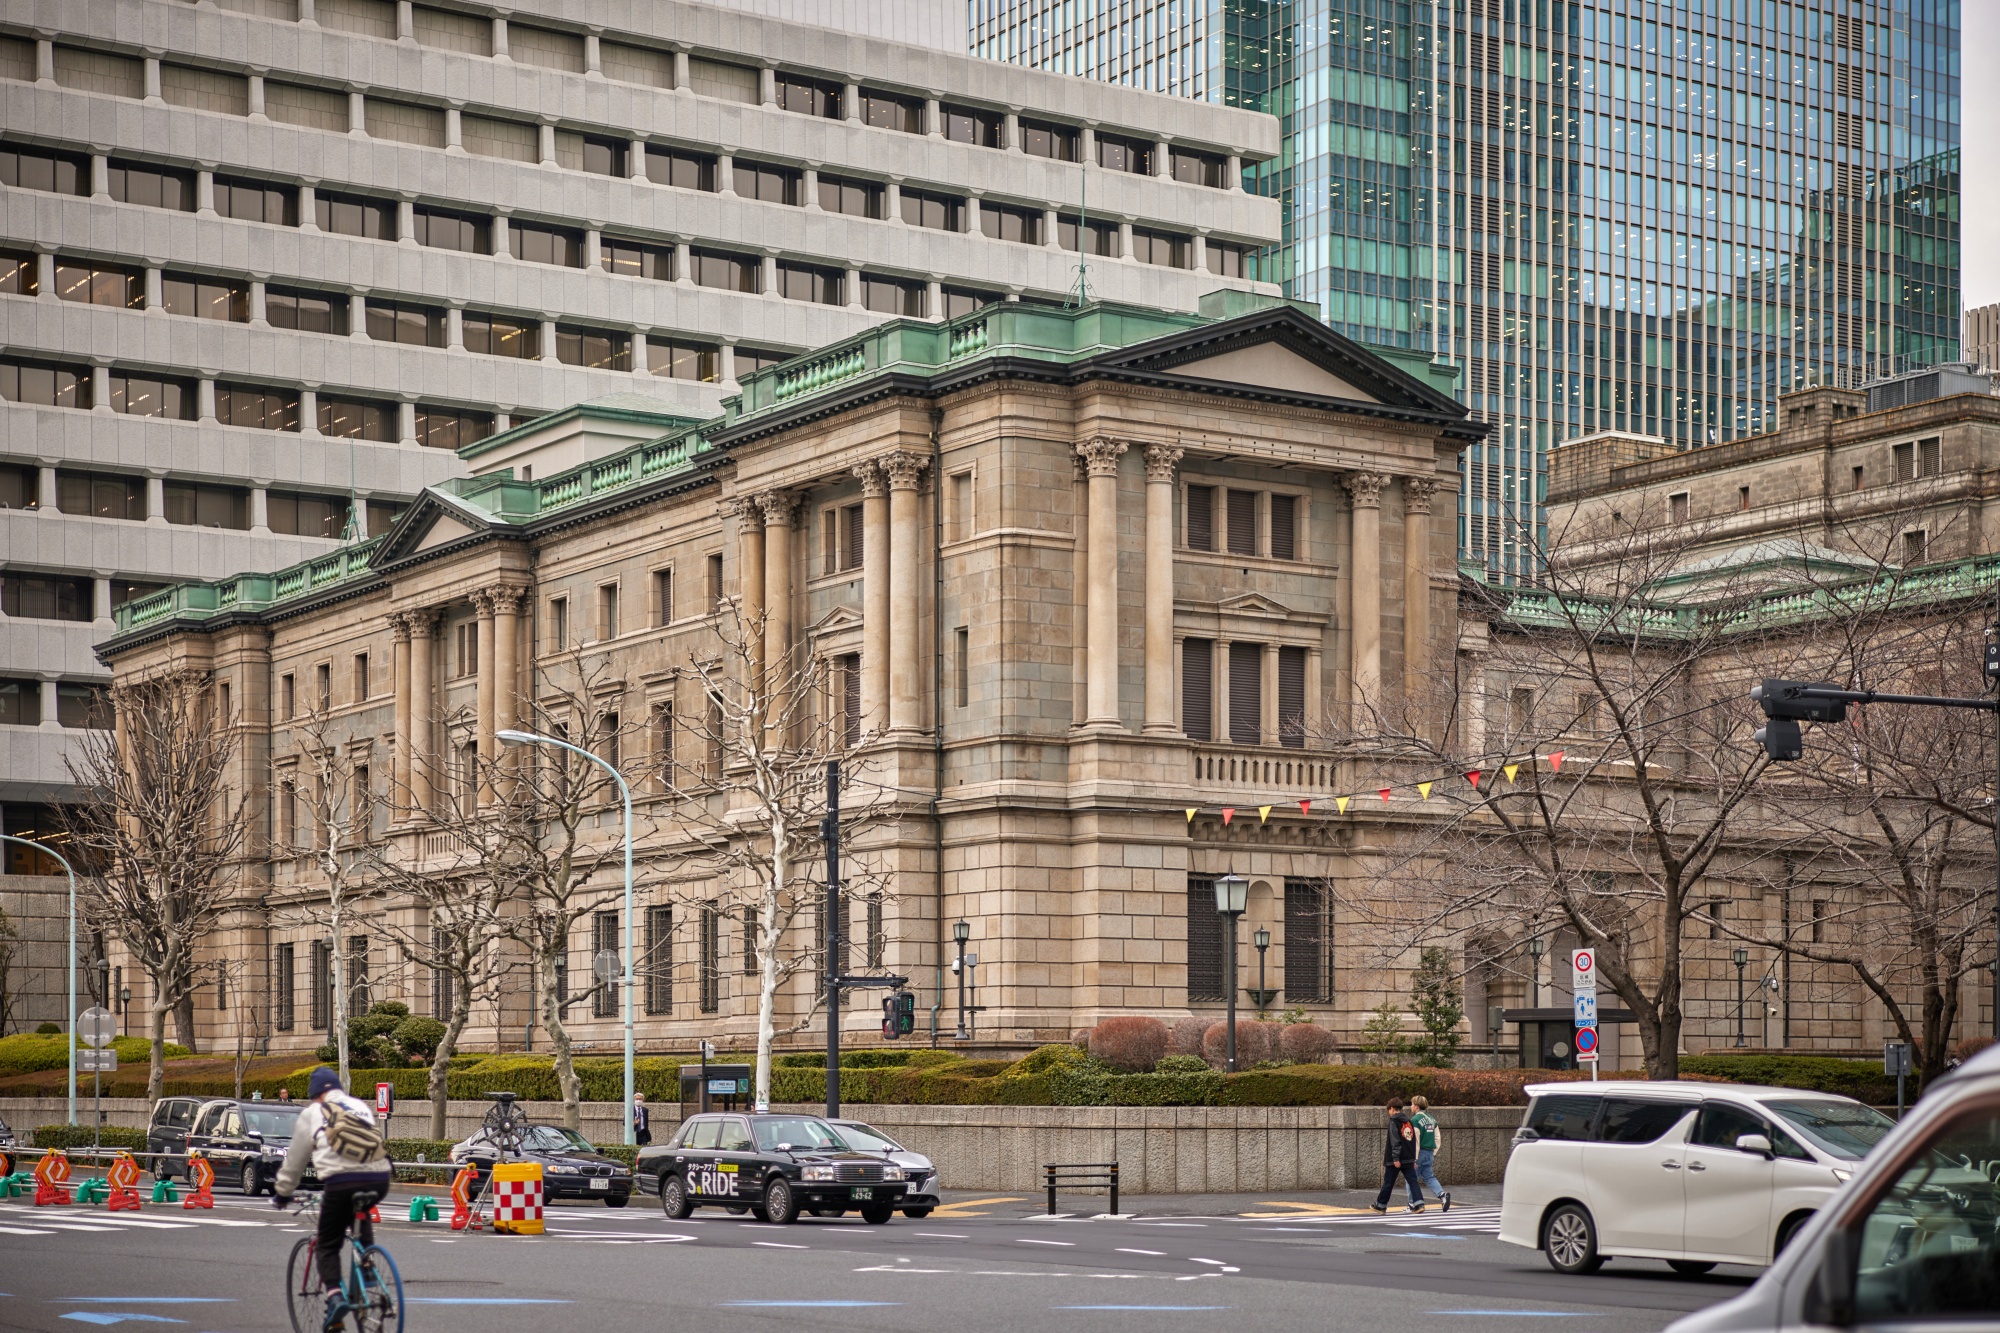 The Bank of Japan headquarters in Tokyo.